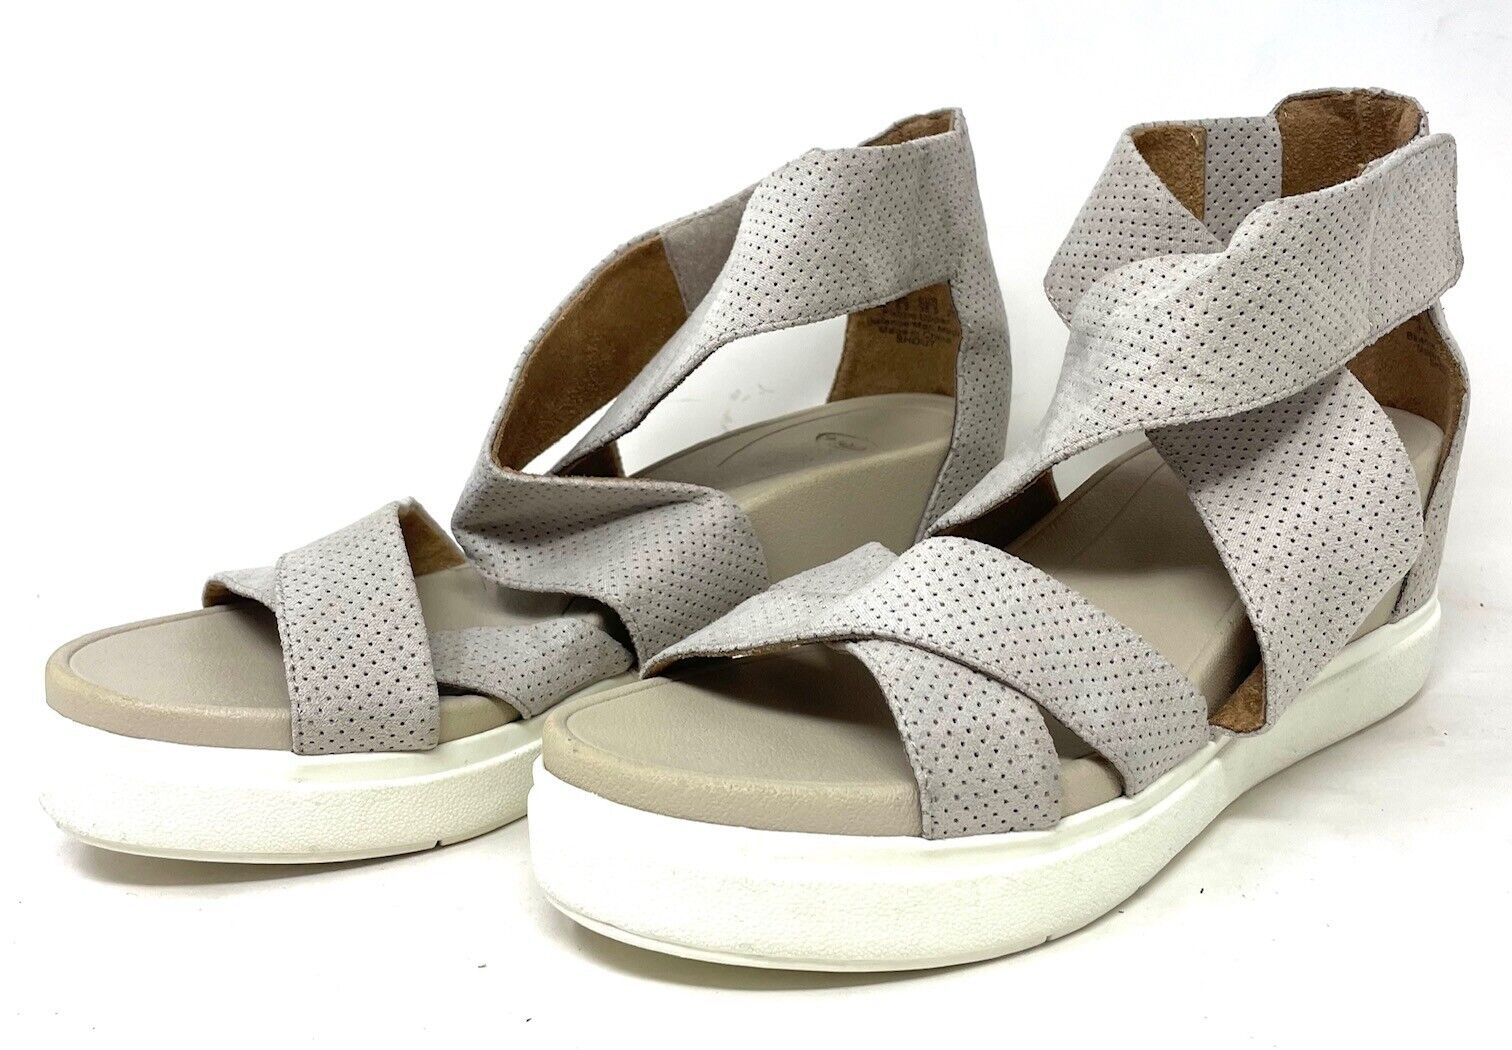 Dr. Scholl’s Sheena Wedge Sandals, Women’s Size 8.5 M, Oyster NEW MSRP $99.99